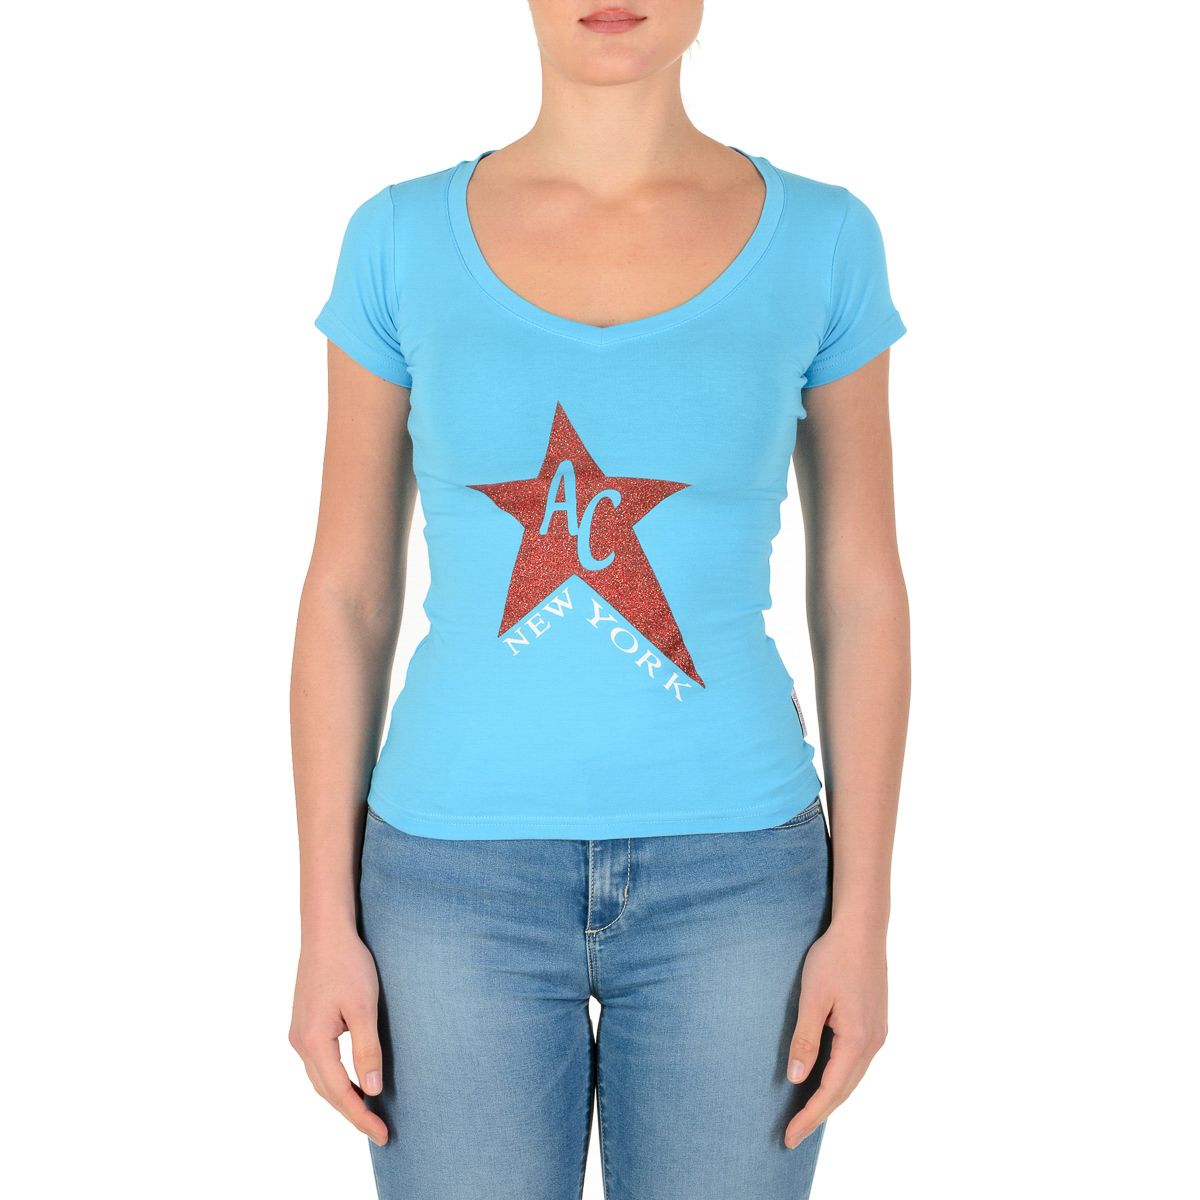 Andrew Charles By Andy Hilfiger Womens T-Shirt TS550 03 1002 TAPIWA AZURE S8